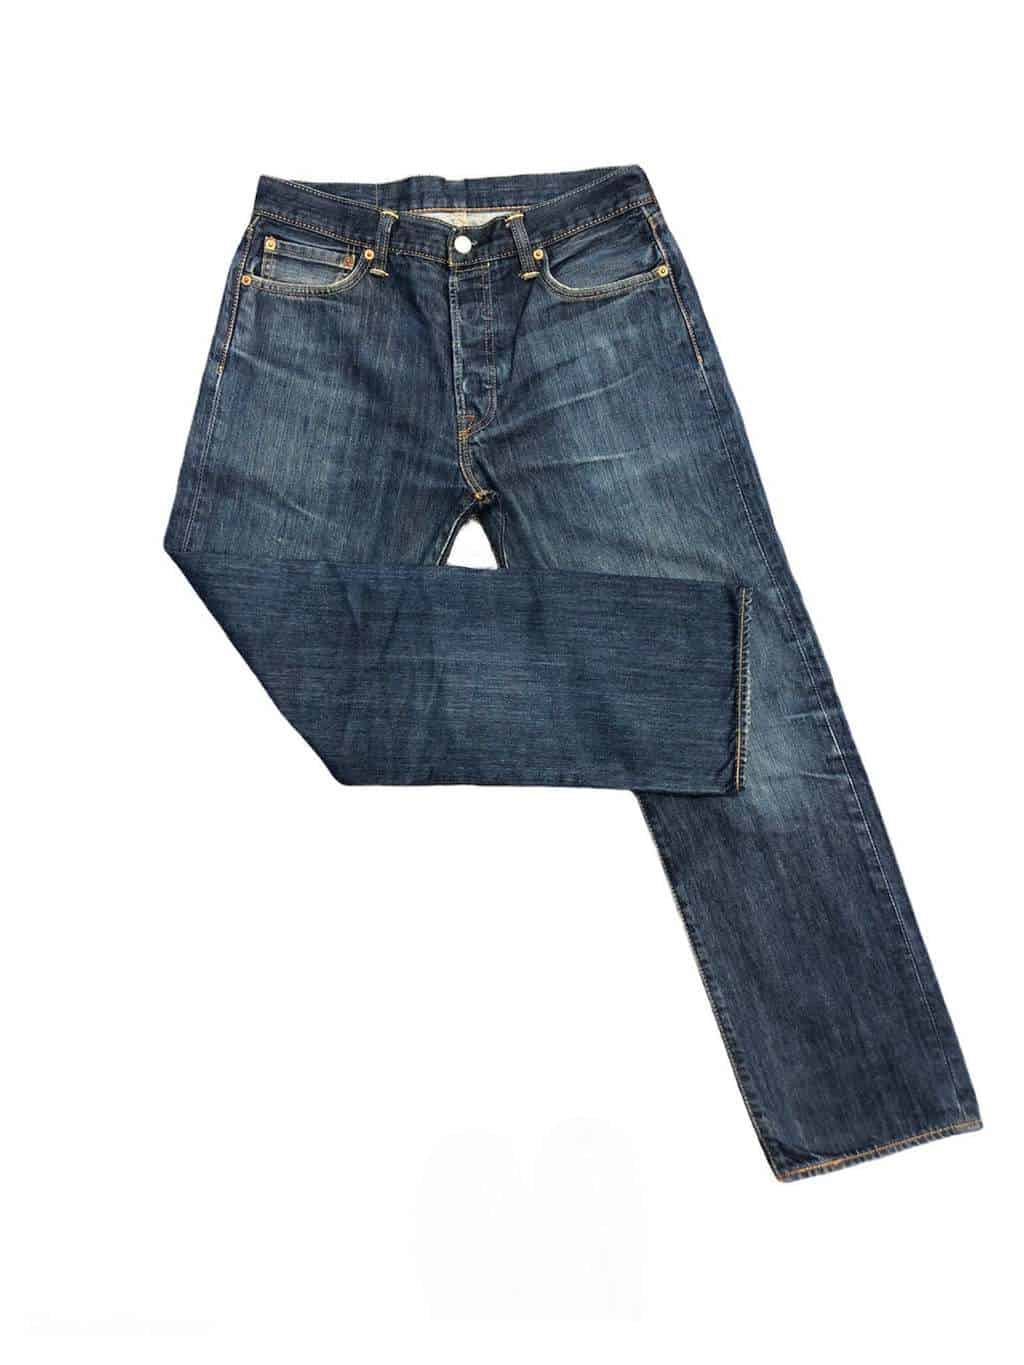 Levis 501 jeans in dark blue denim with whiskered hips and leather 